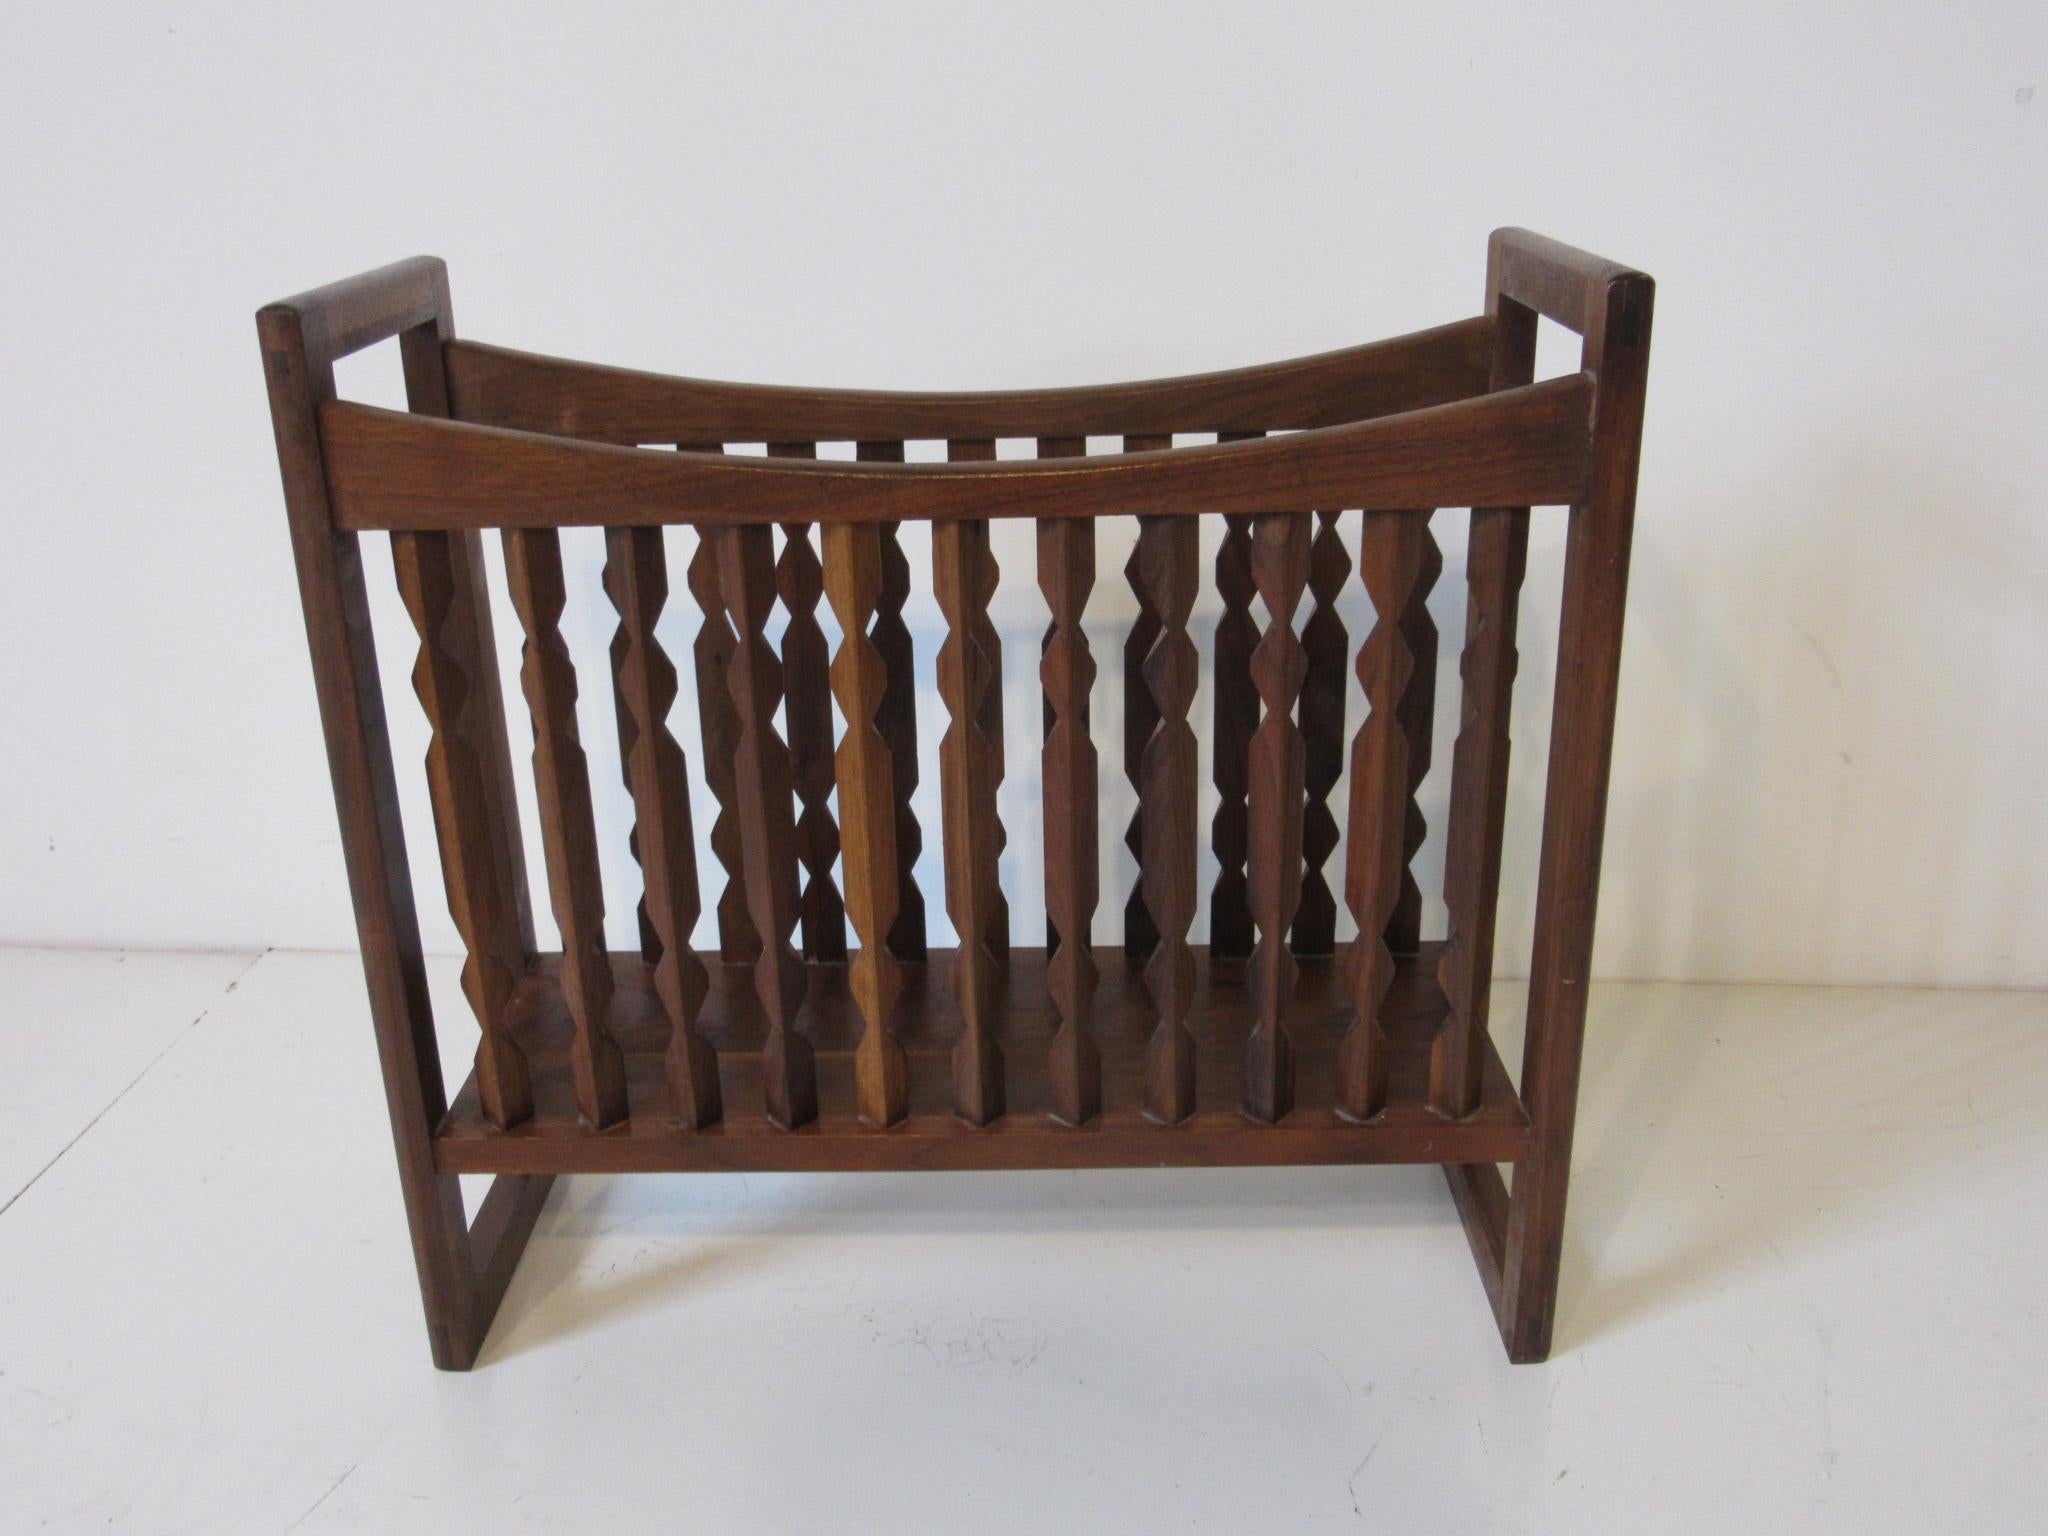 A walnut magazine rack with sculptural spindles to the sides and higher open boxed ends that serve as handles. A sturdy place to keep your reading materials organized, manufactured by the Drexel Furniture Company .